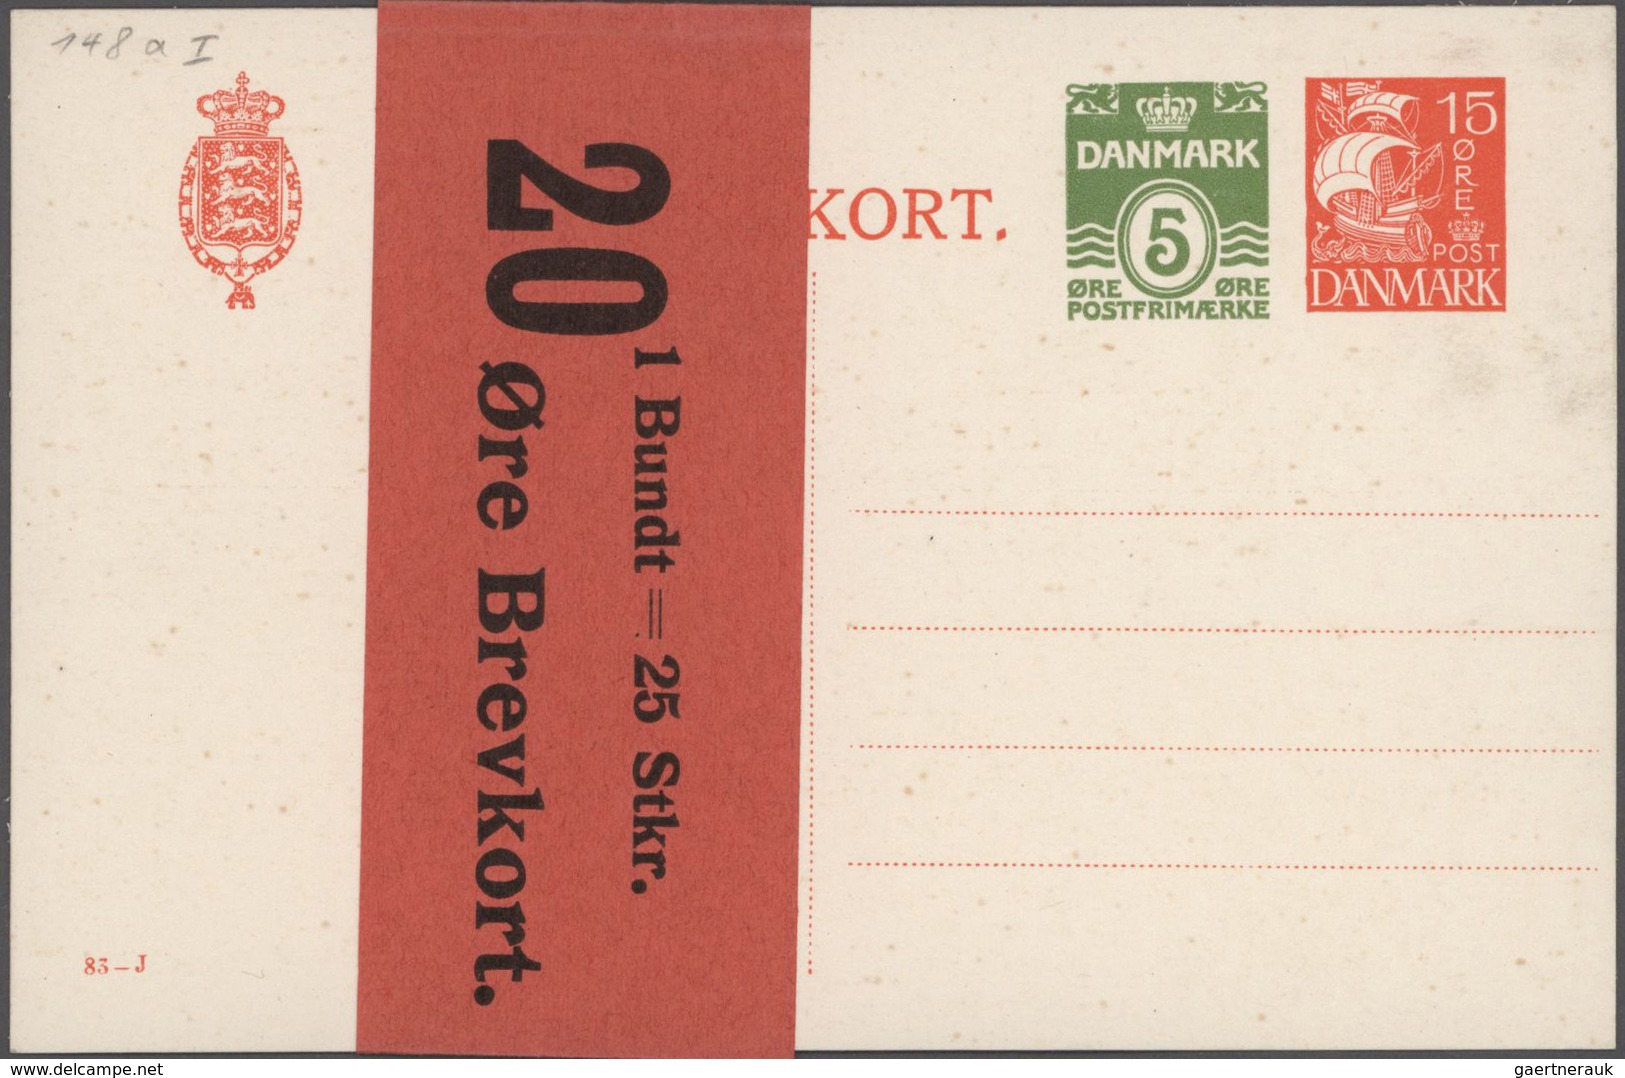 Dänemark - Ganzsachen: 1864/1935 Collection of about 710 unused and used postal stationeries in larg